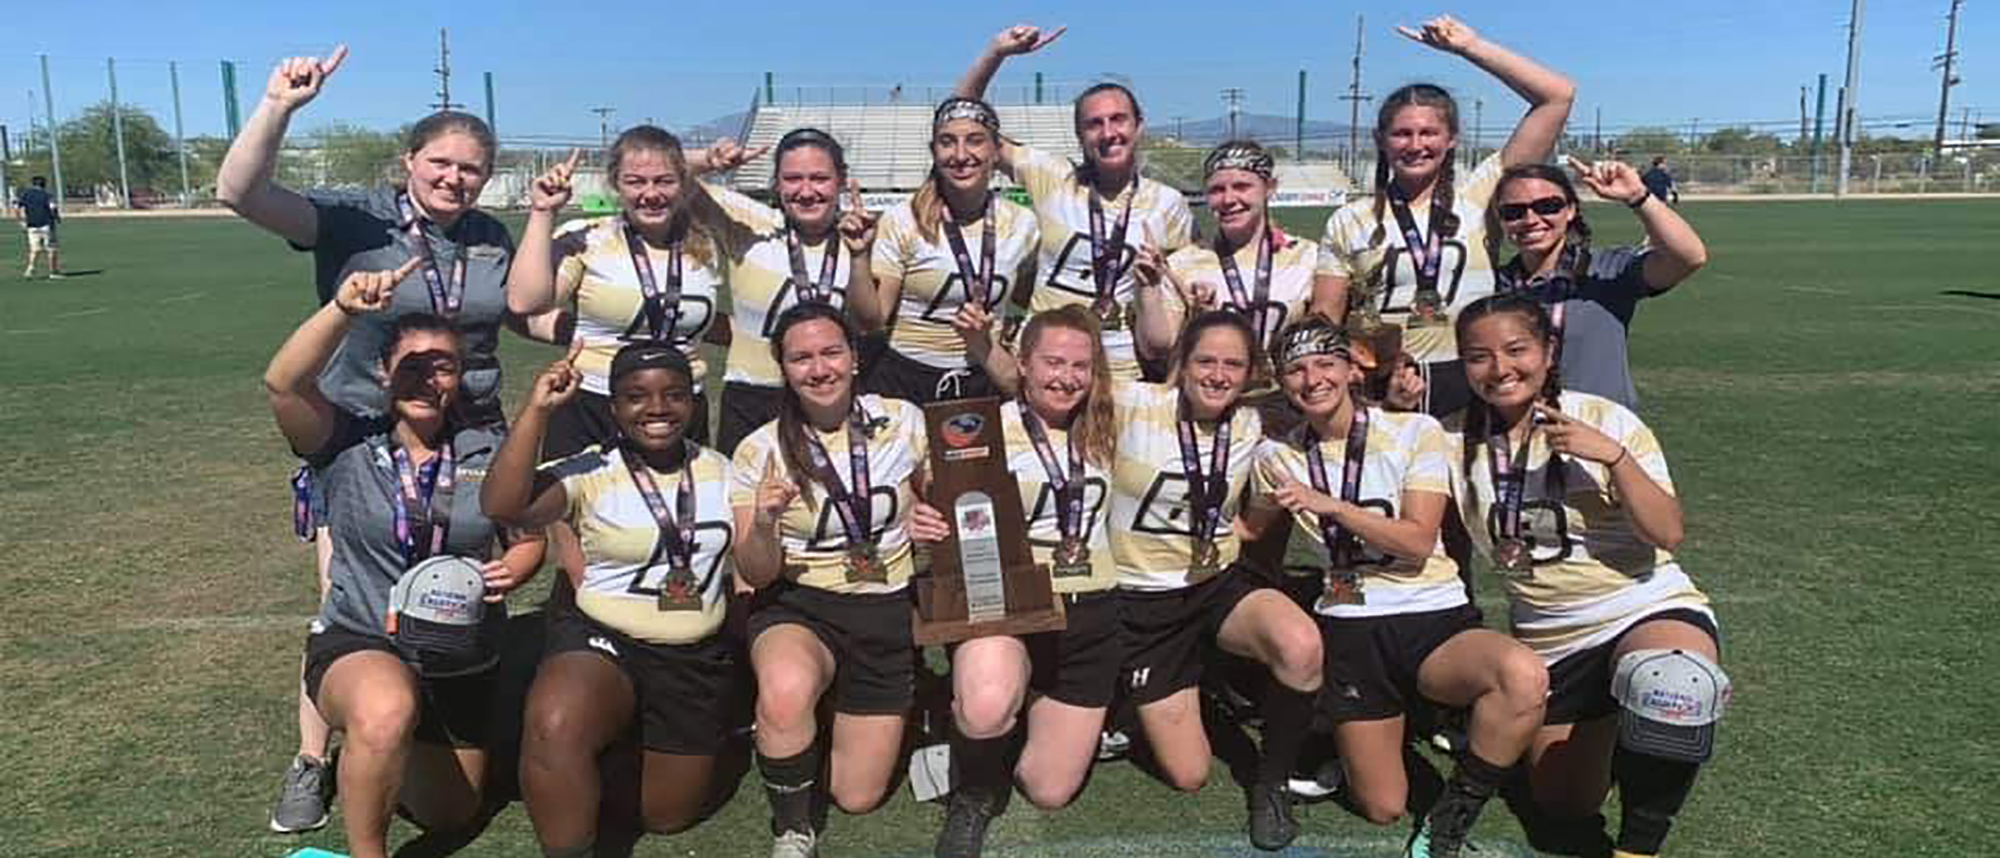 WOMEN’S RUGBY NAMED DIVISION II NATIONAL CHAMPIONS